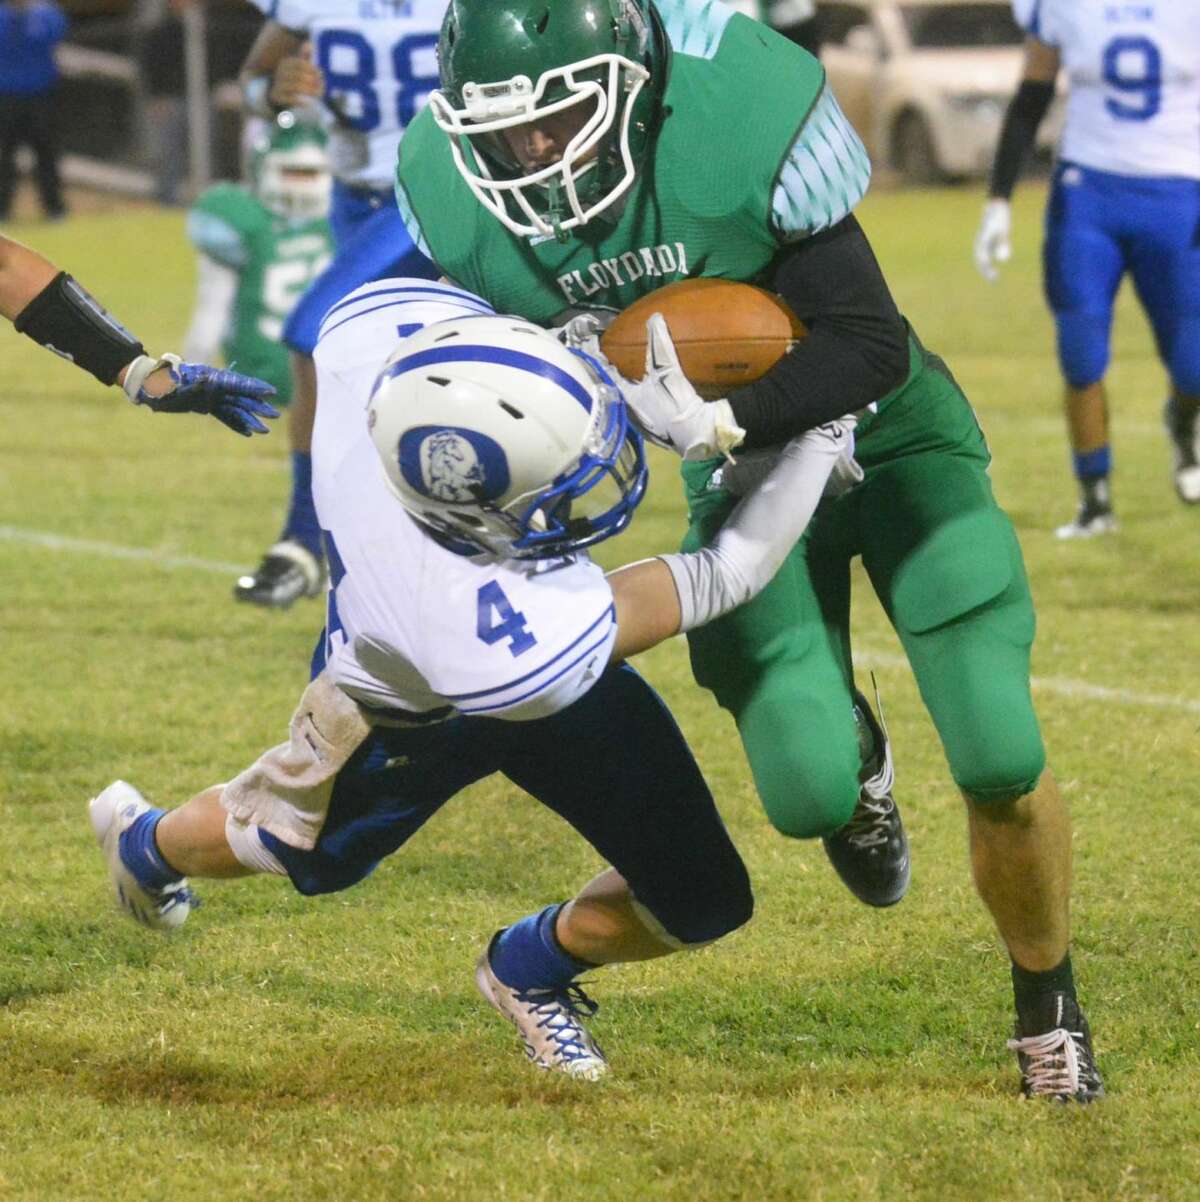 Floydada running back Corbin Nutt tries to run over Olton tackler Kyle Peggram during a District 2-2A Division I football game Friday night. Nutt rushed for 92 yards on 20 carries to help the Whirlwinds to a 24-19 victory.